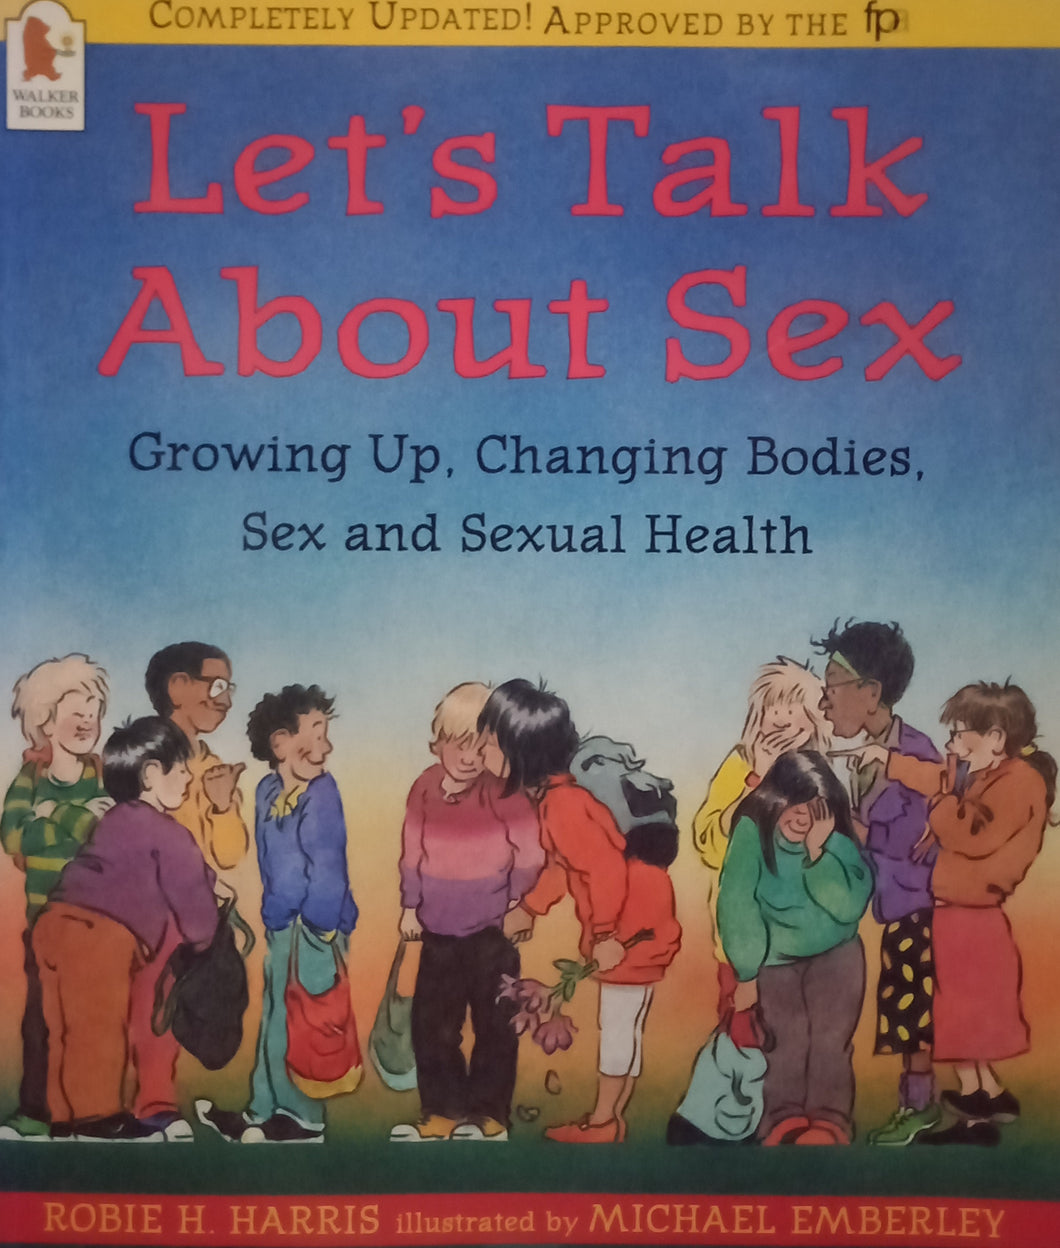 Let's Talk About Sex by Robbie H. Harris